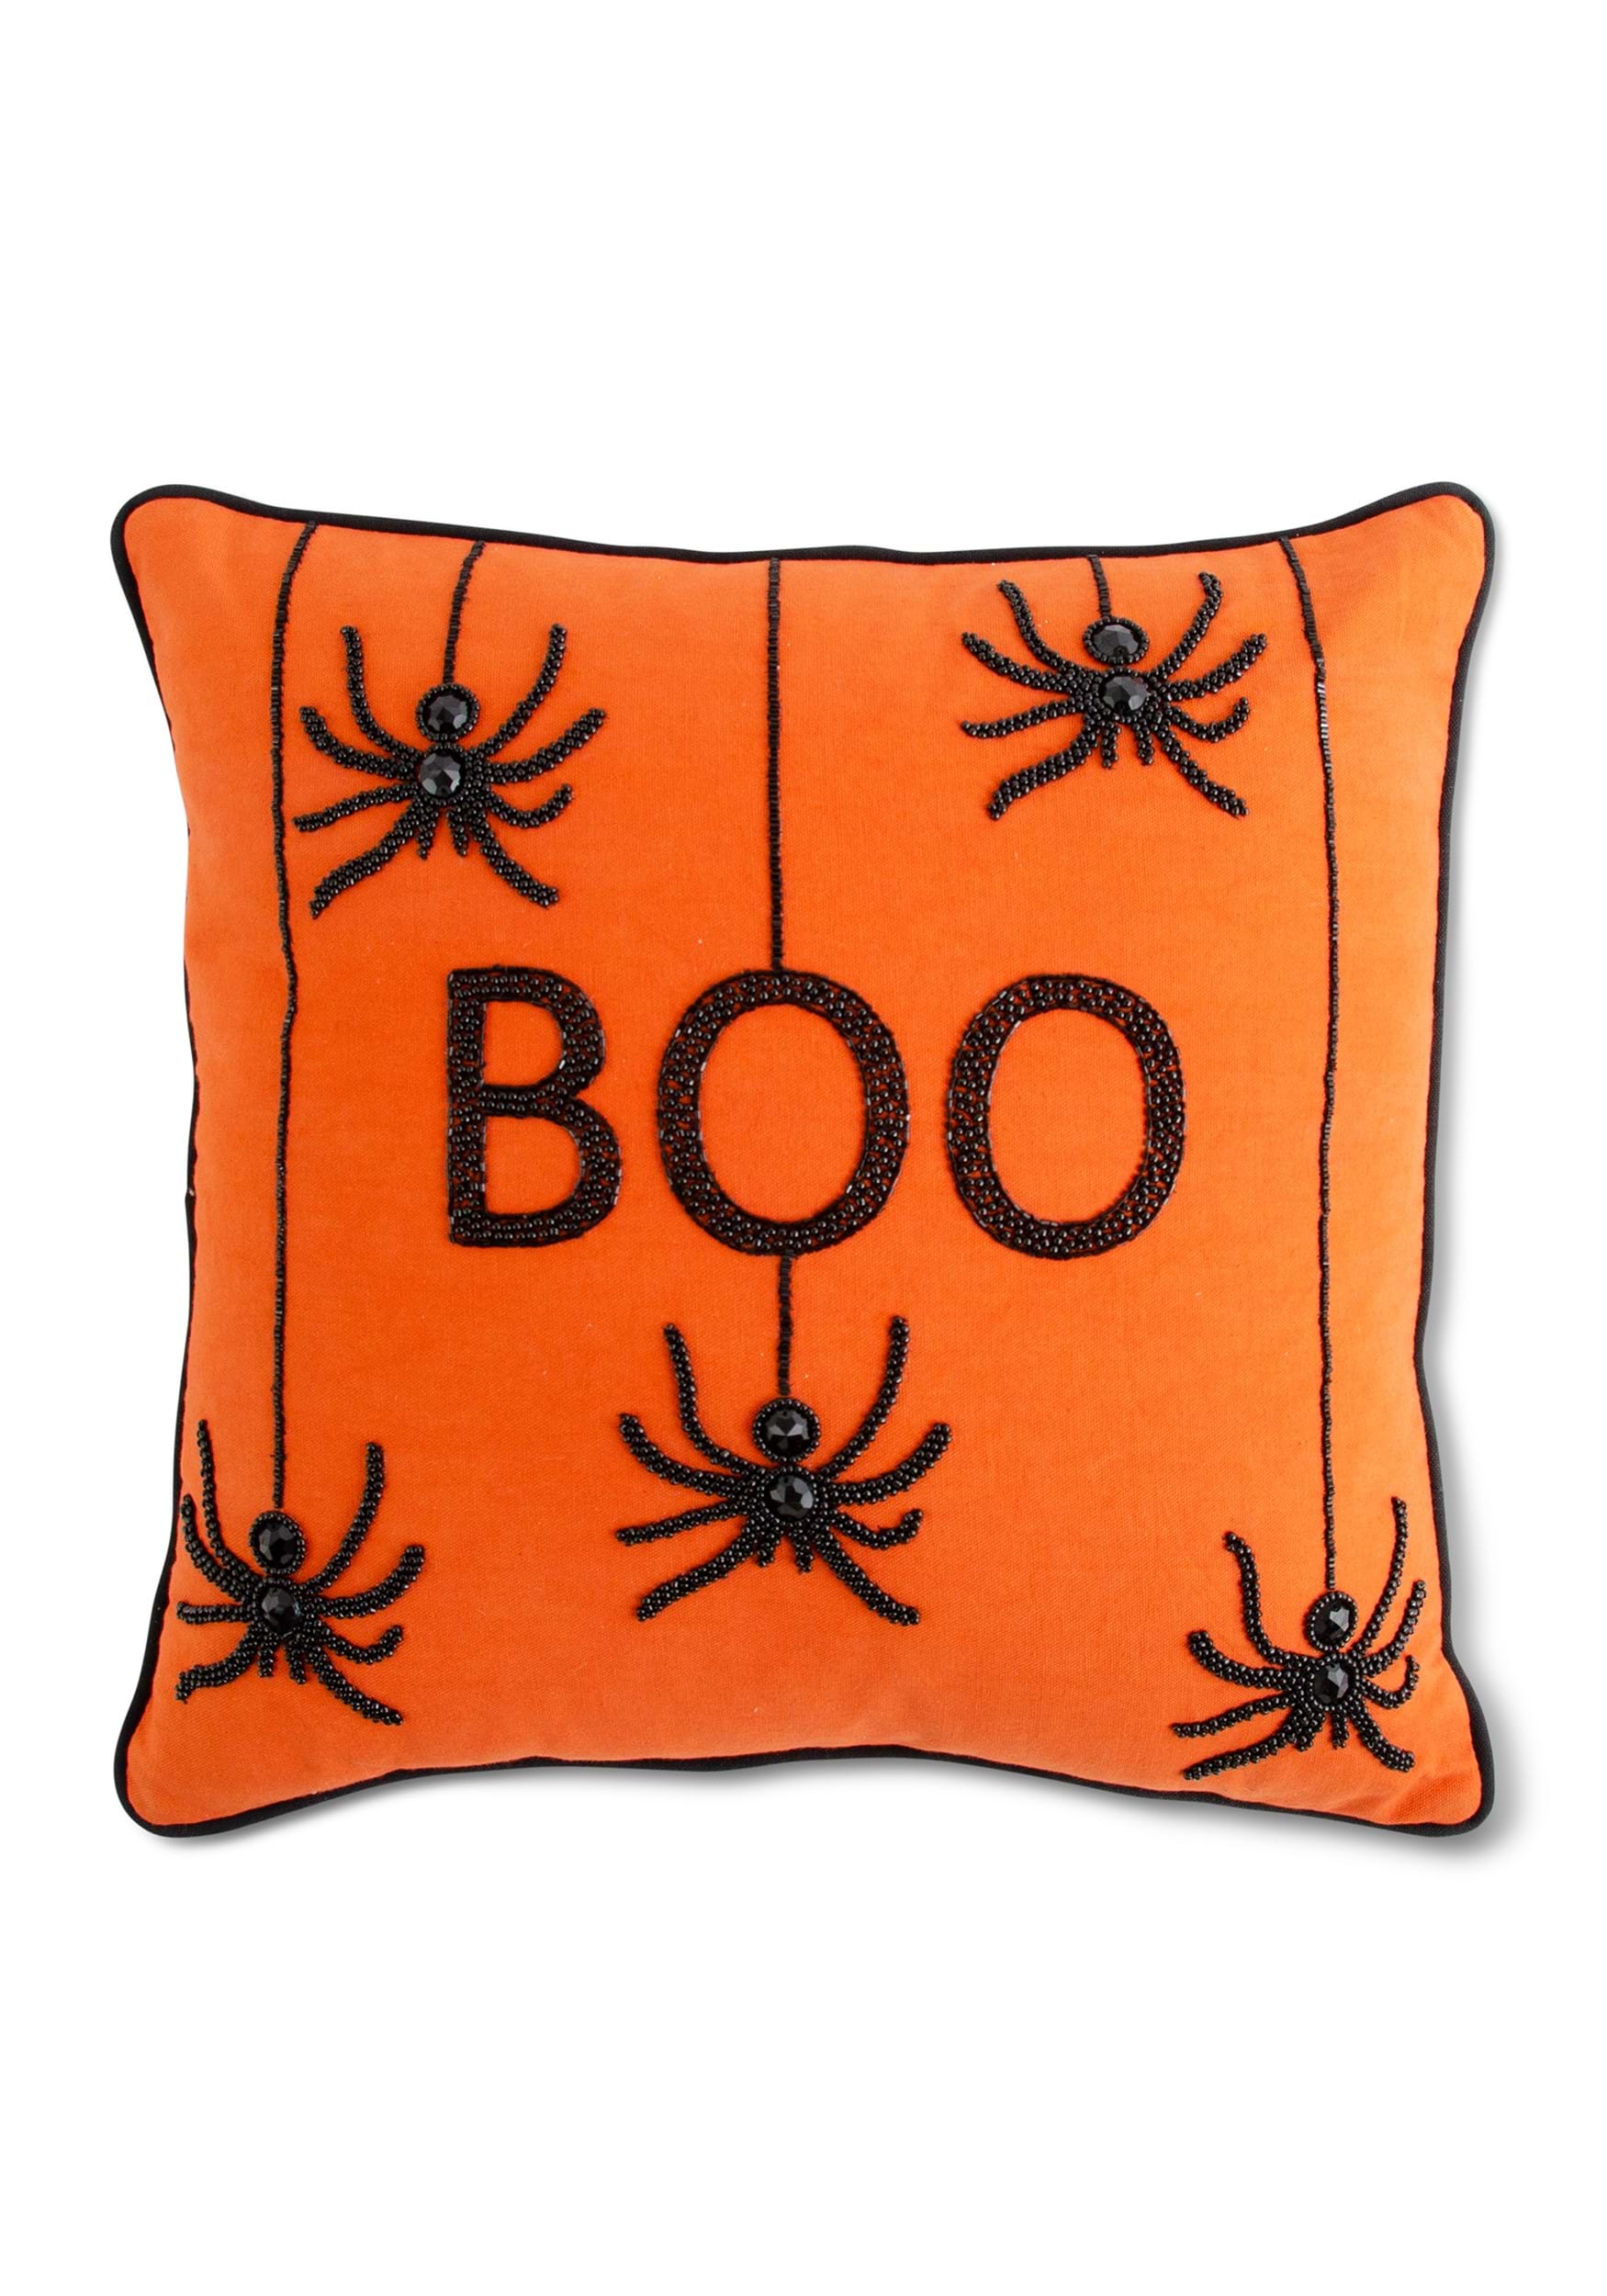 Eighteen Inch Orange Square Beaded BOO Pillow With Spiders